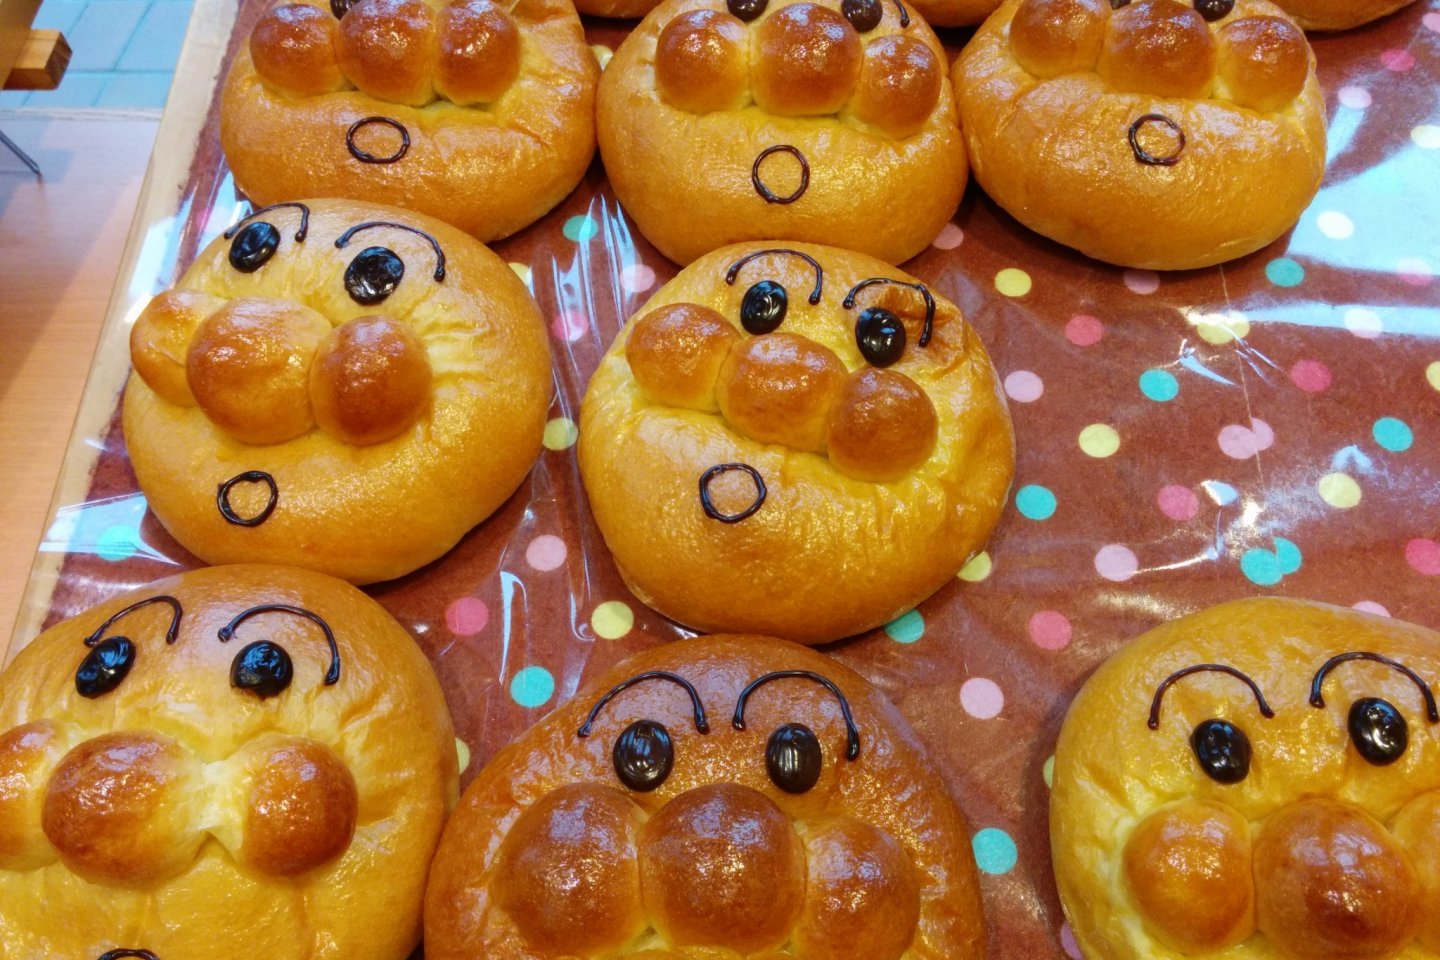 Uncle Jam's Bakery makes a whole host of baked goods modeled after Anpanman characters 